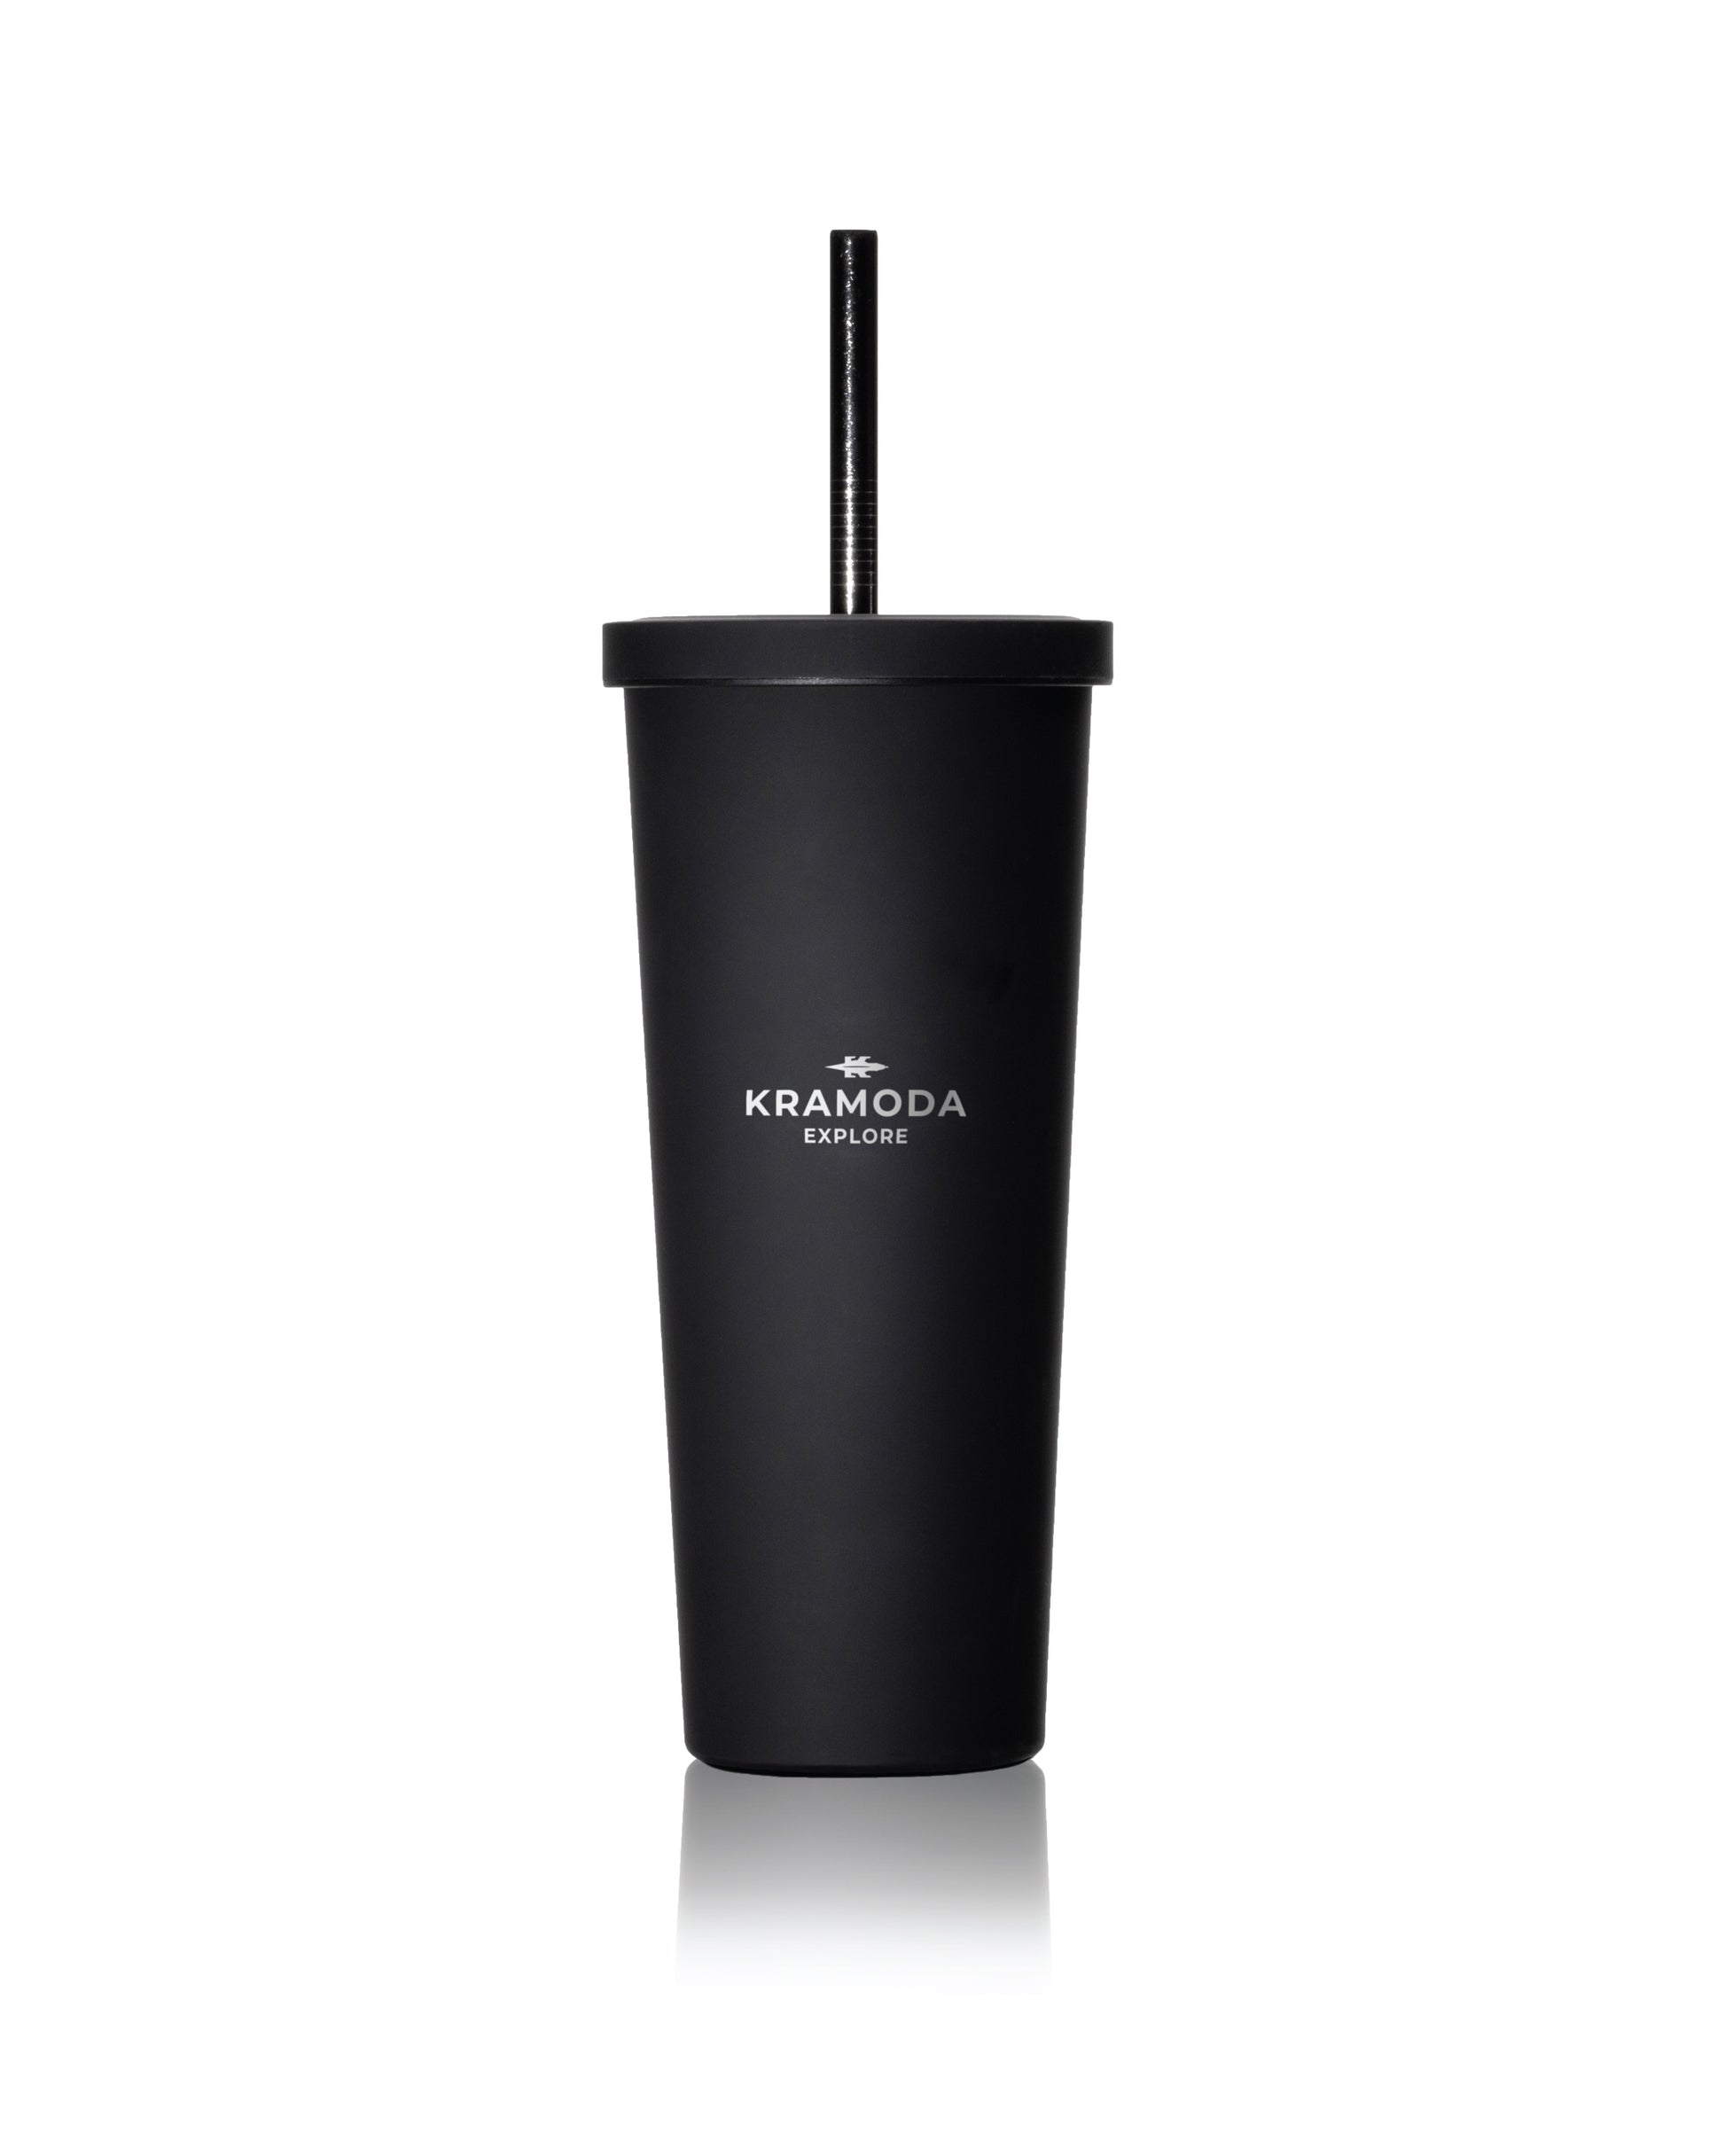 Starbucks Thailand You Deserve Some Coffee Cold Cup Tumbler